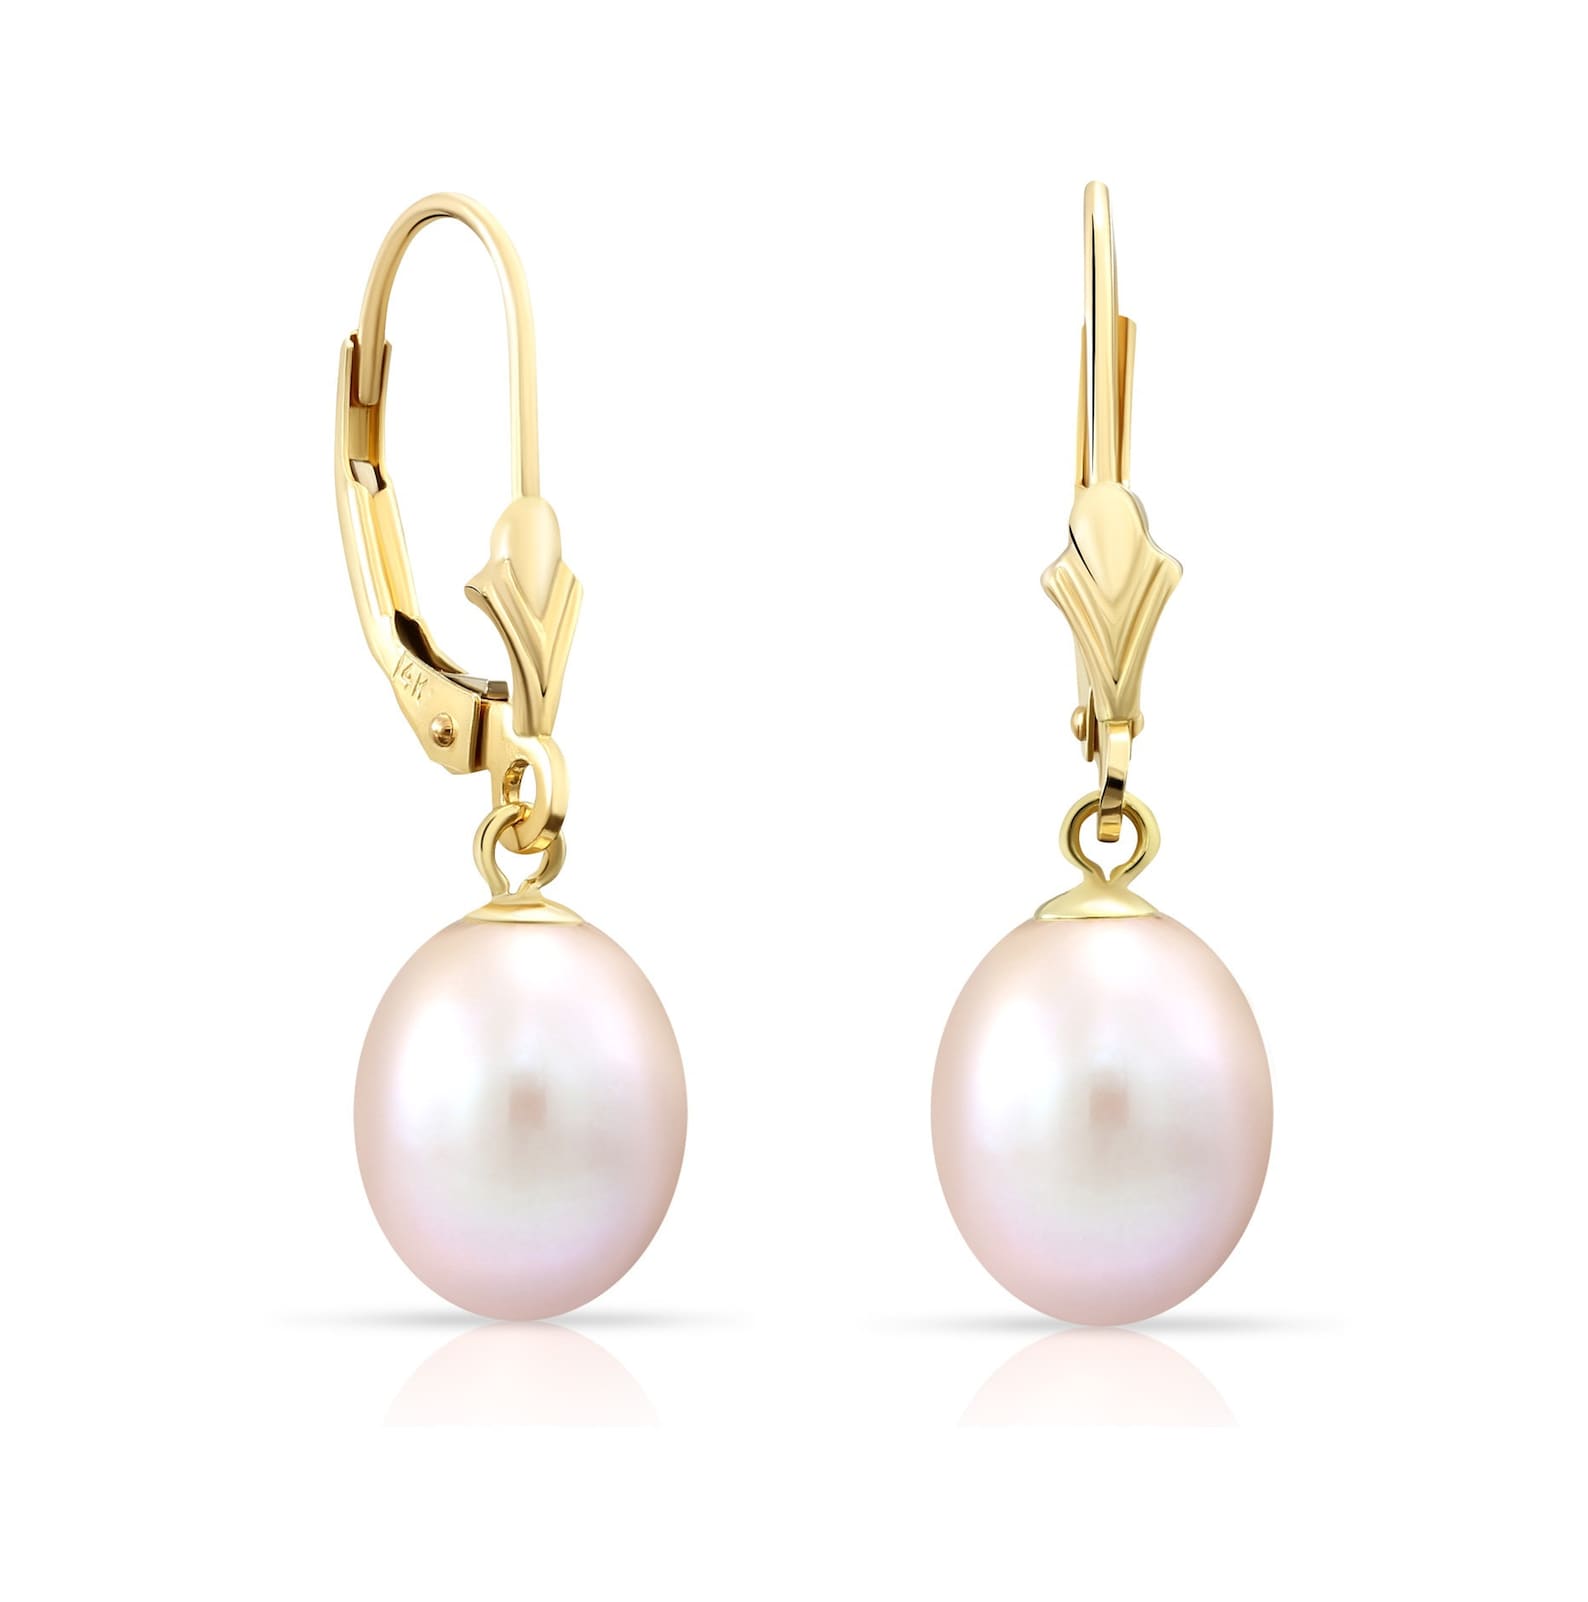 Pearl Earrings in 14k Yellow Gold Hand Selected Freshwater - Etsy